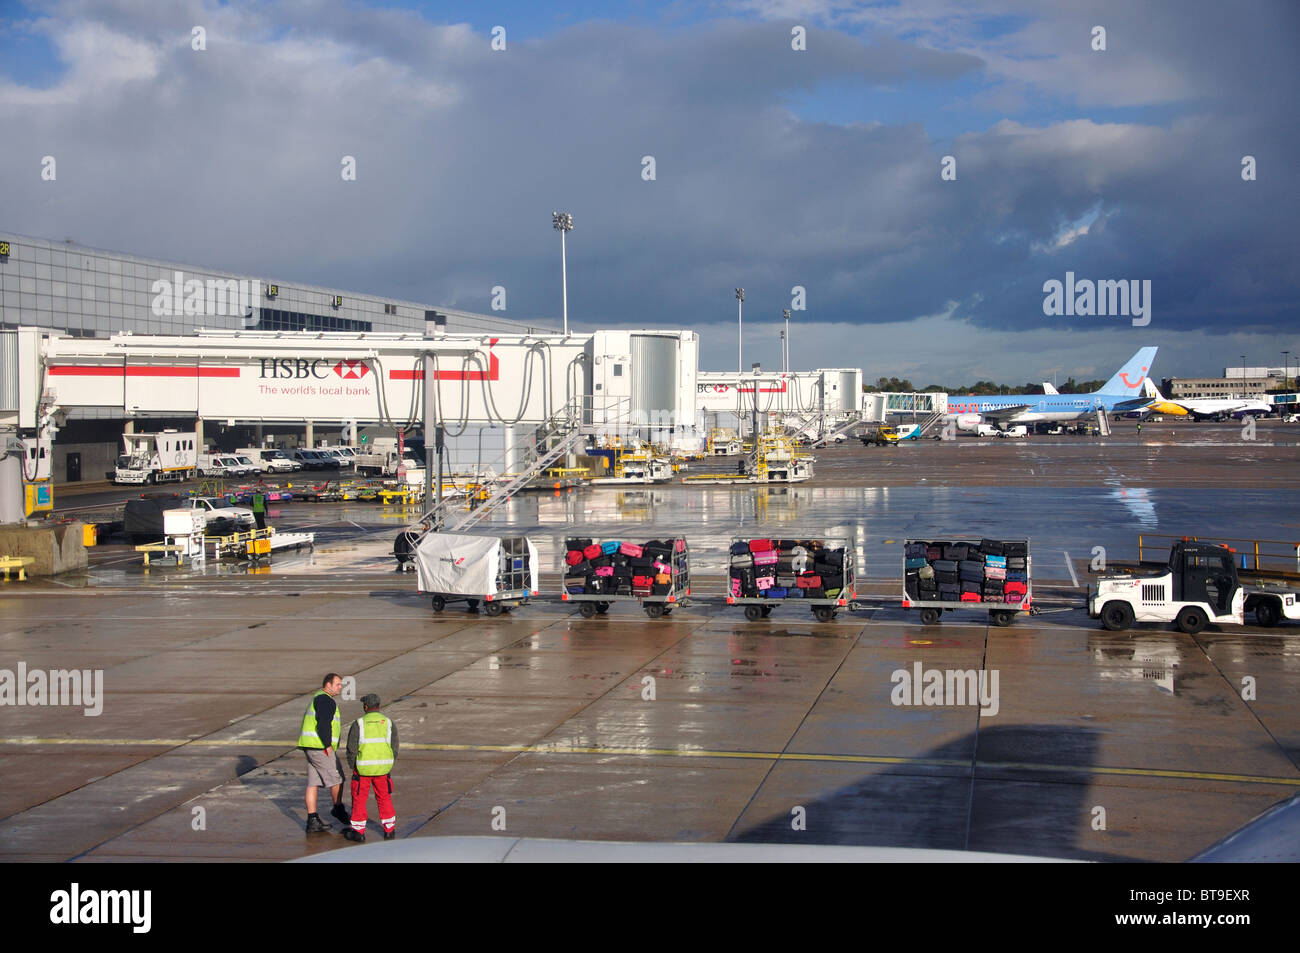 Luggage trollies on tarmac, Gatwick Airport, North Terminal, Gatwick Airport, Crawley, West Sussex, England, United Kingdom Stock Photo